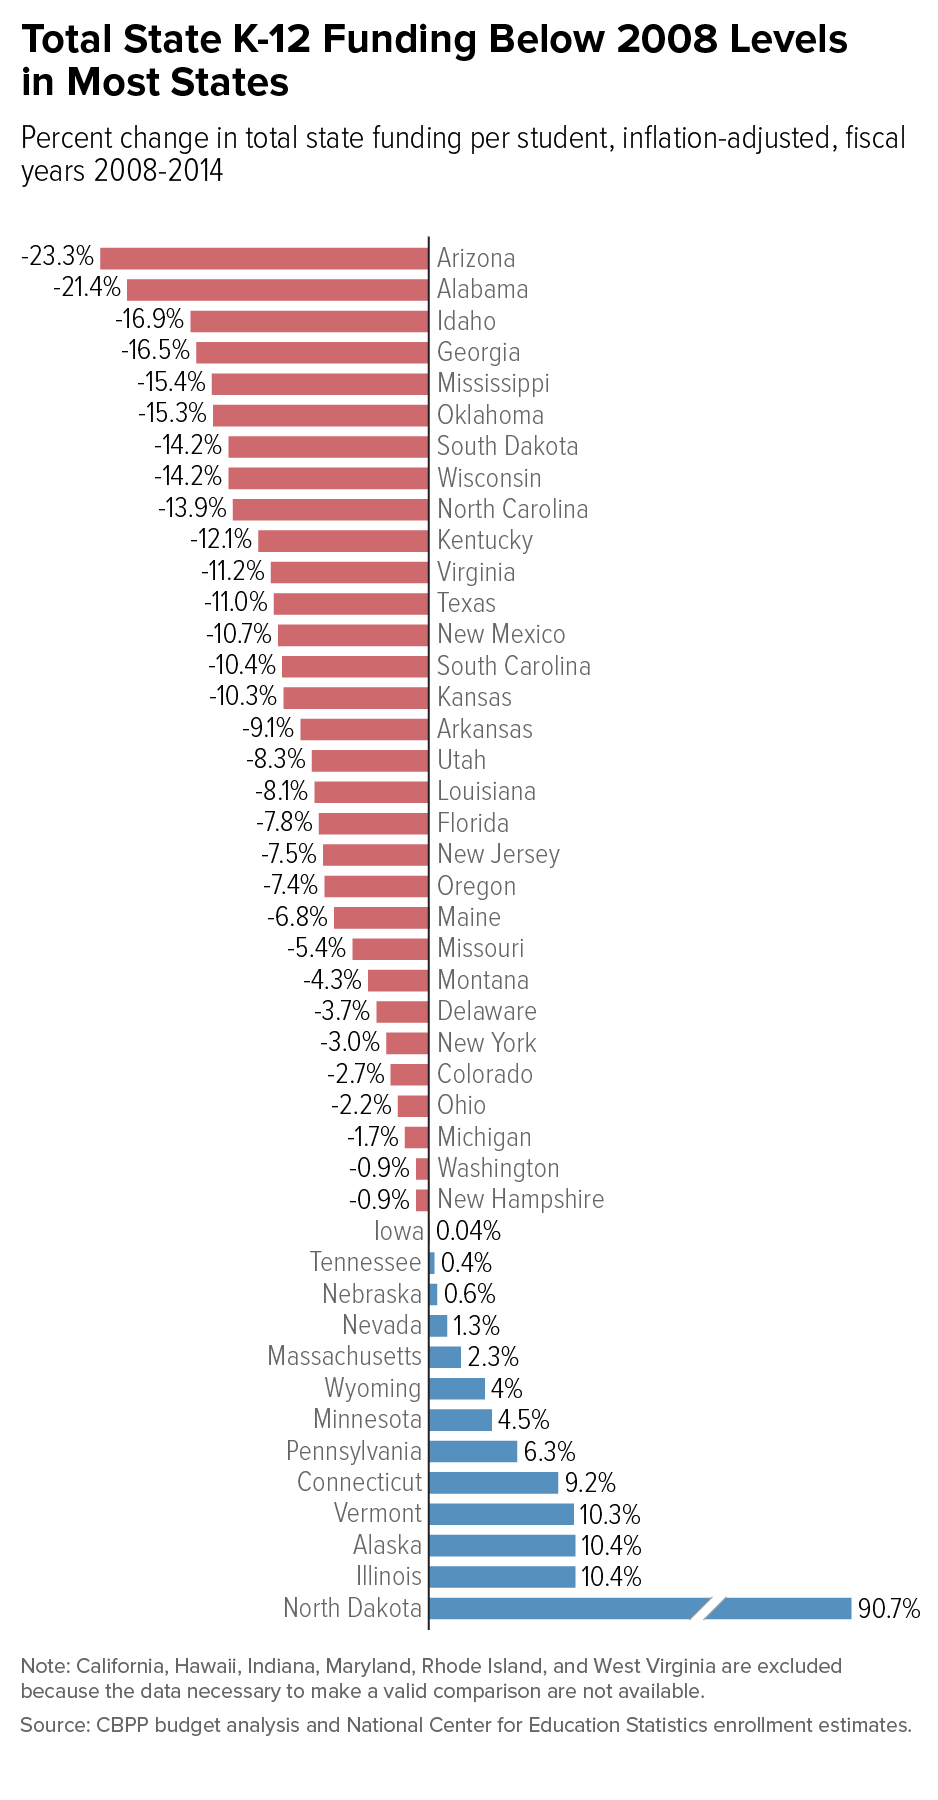 Total State Funding Below 2008 Levels in Most States